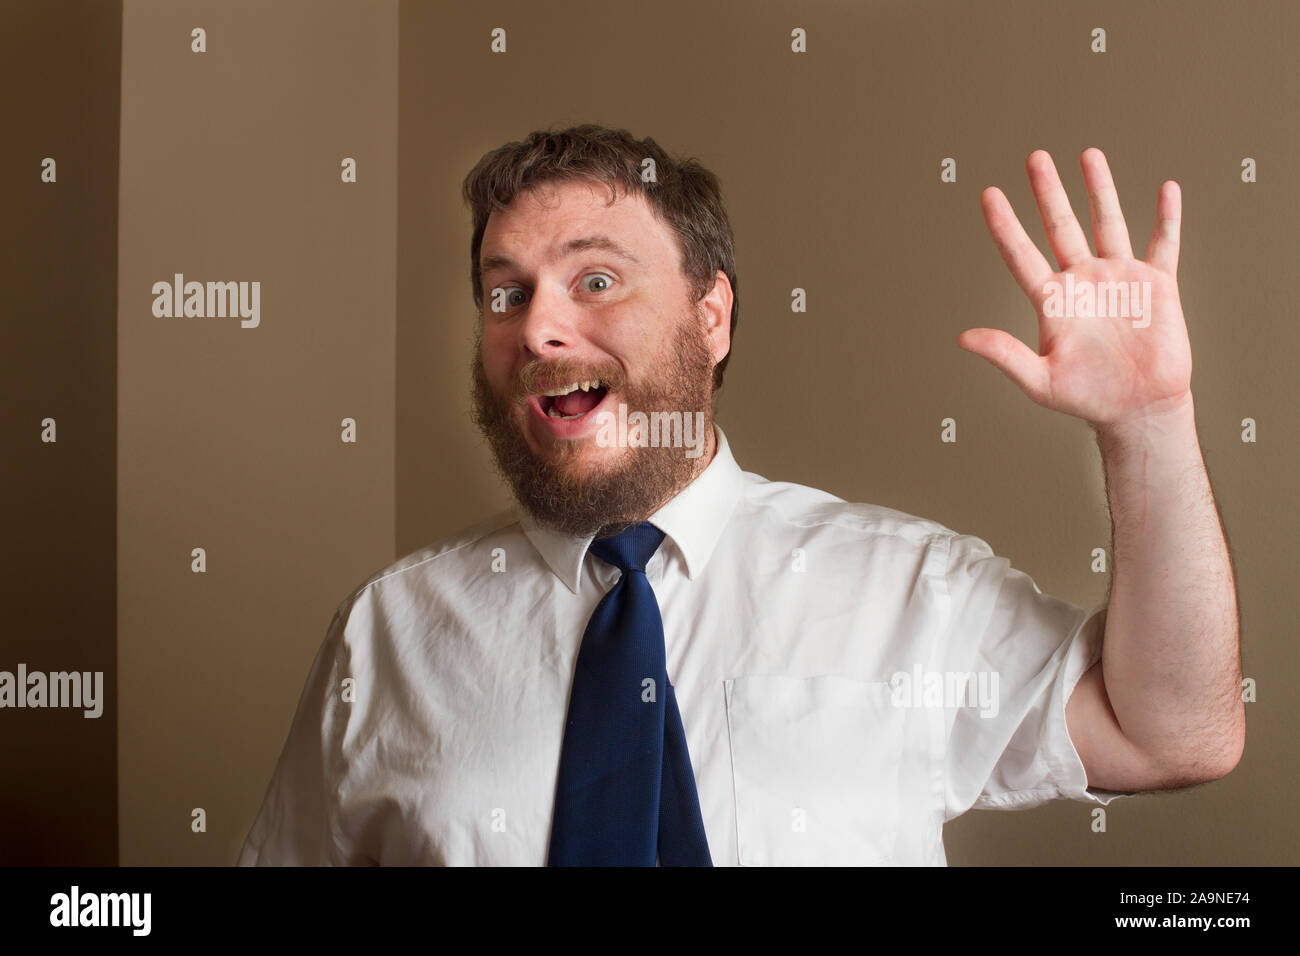 man with a big fake smile waiving at something Stock Photo